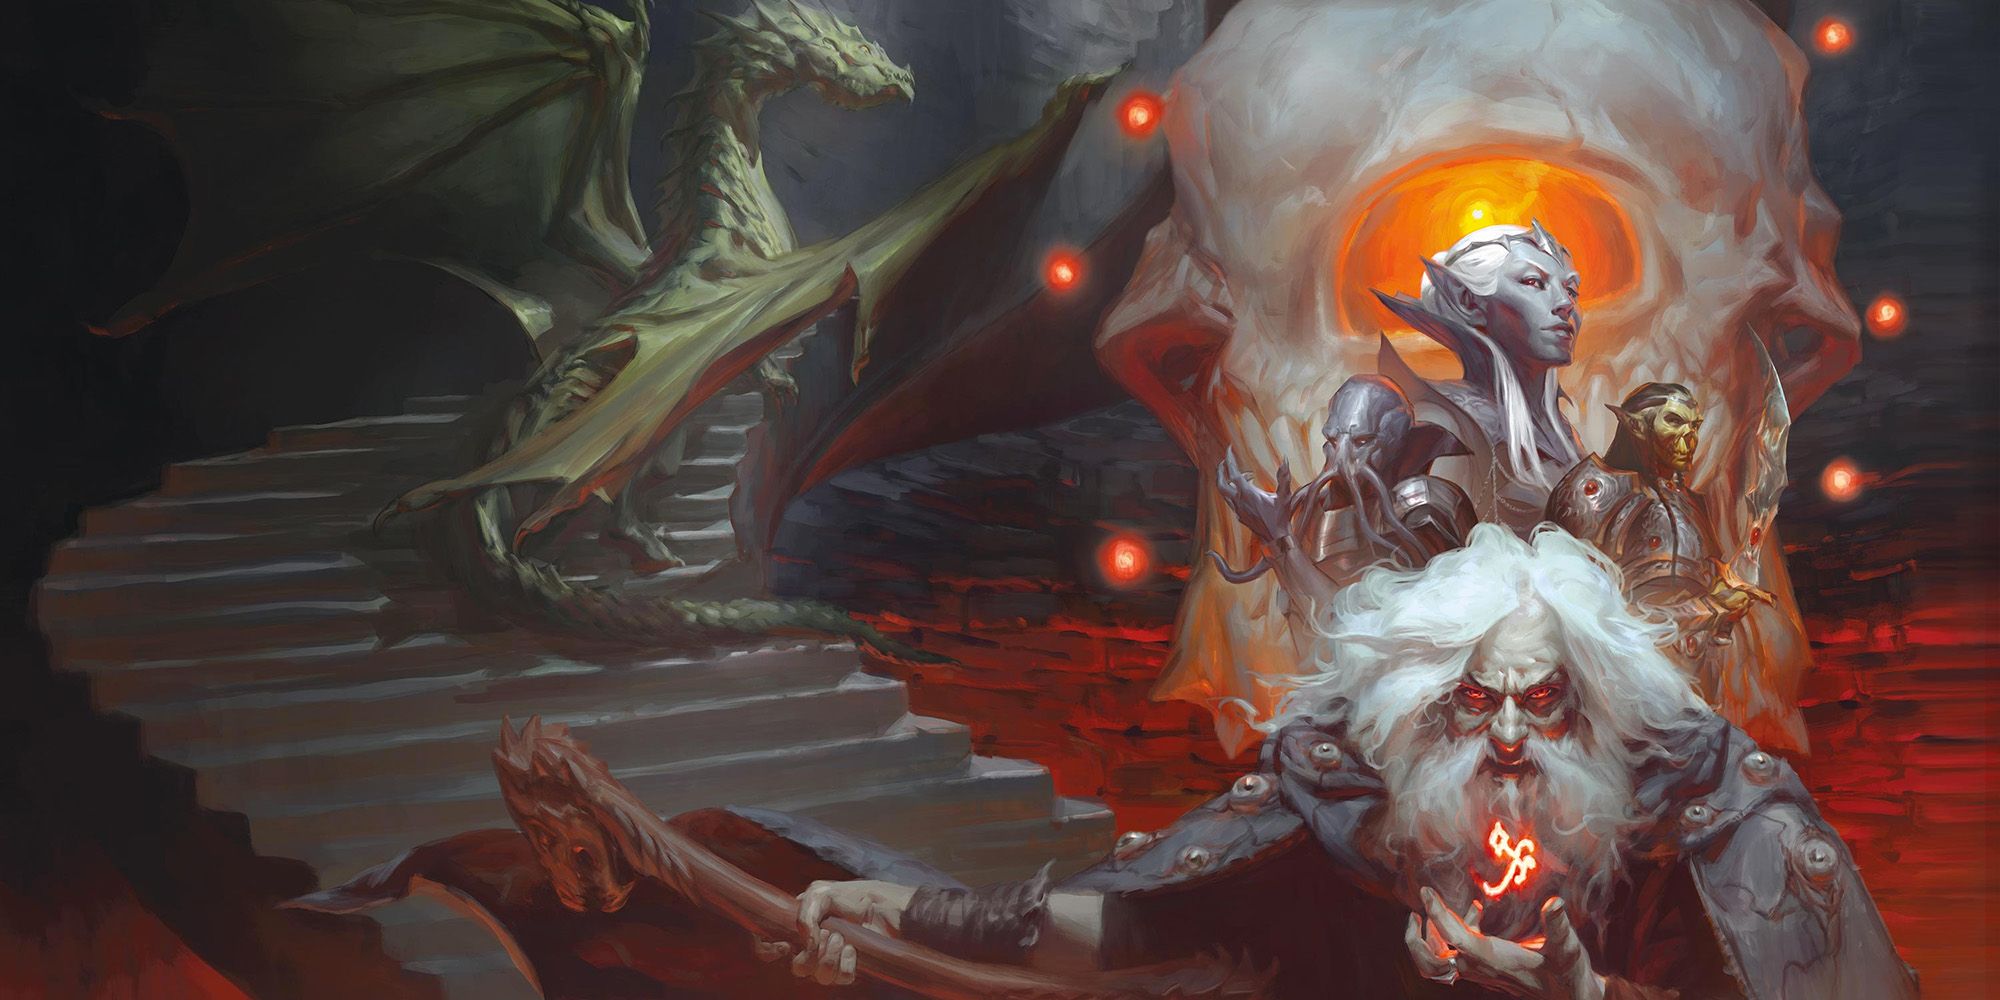 Cover art for Waterdeep: Dungeon of the Mad Mage premade DnD campaign